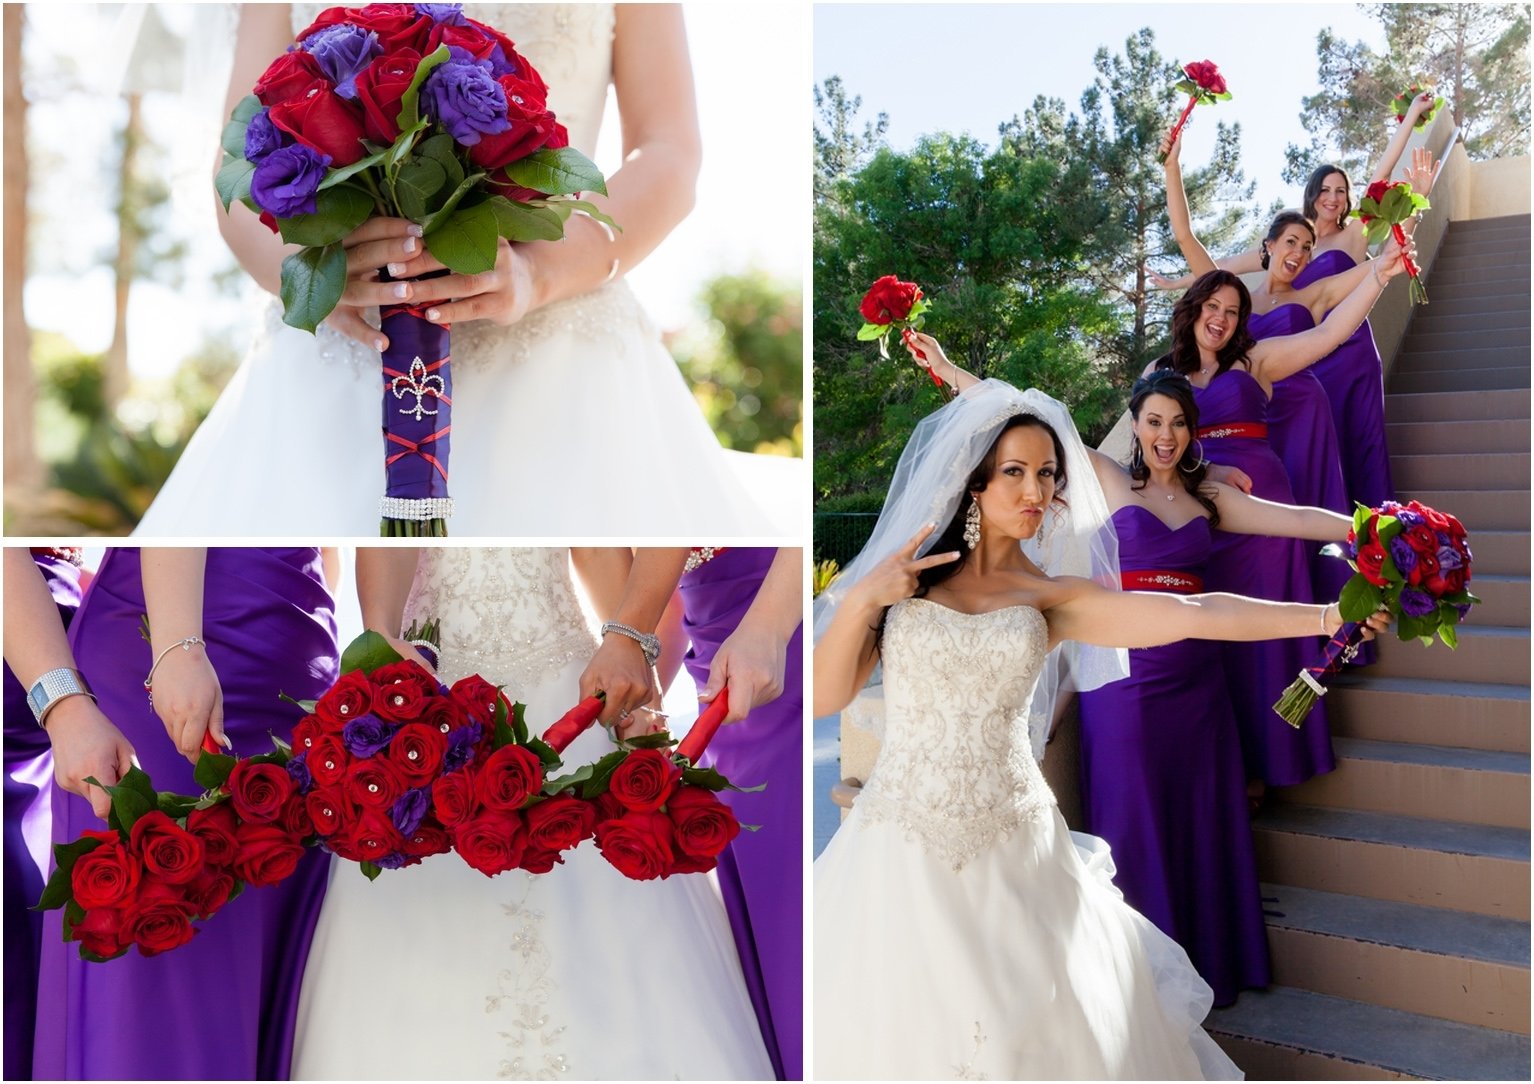 10 Lovely Red And Purple Wedding Ideas red and purple wedding ideas wedding ideas uxjj 2022